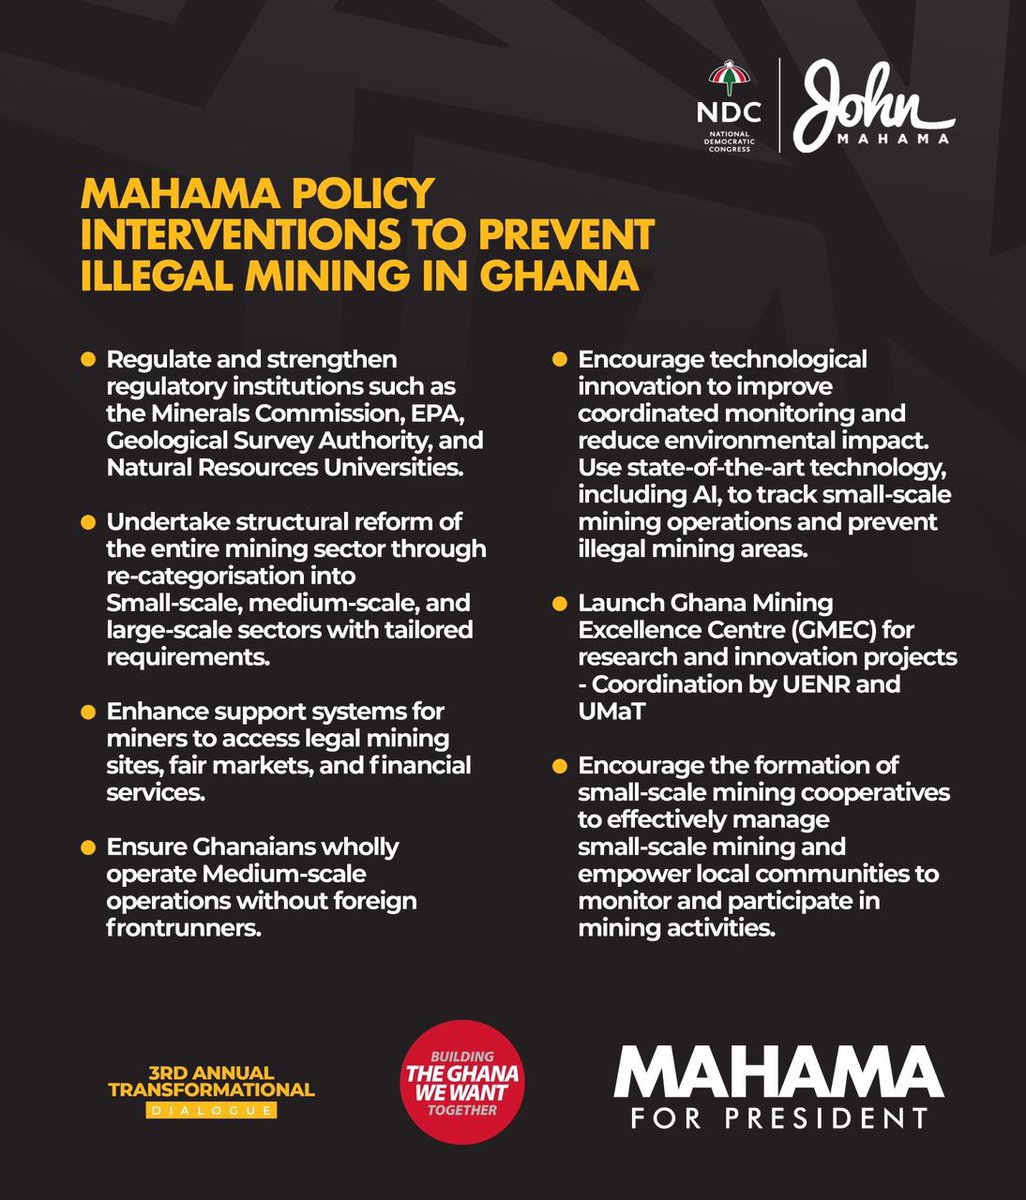 Mahama policy interventions to prevent illegal mining in Ghana
#TogetherForChange